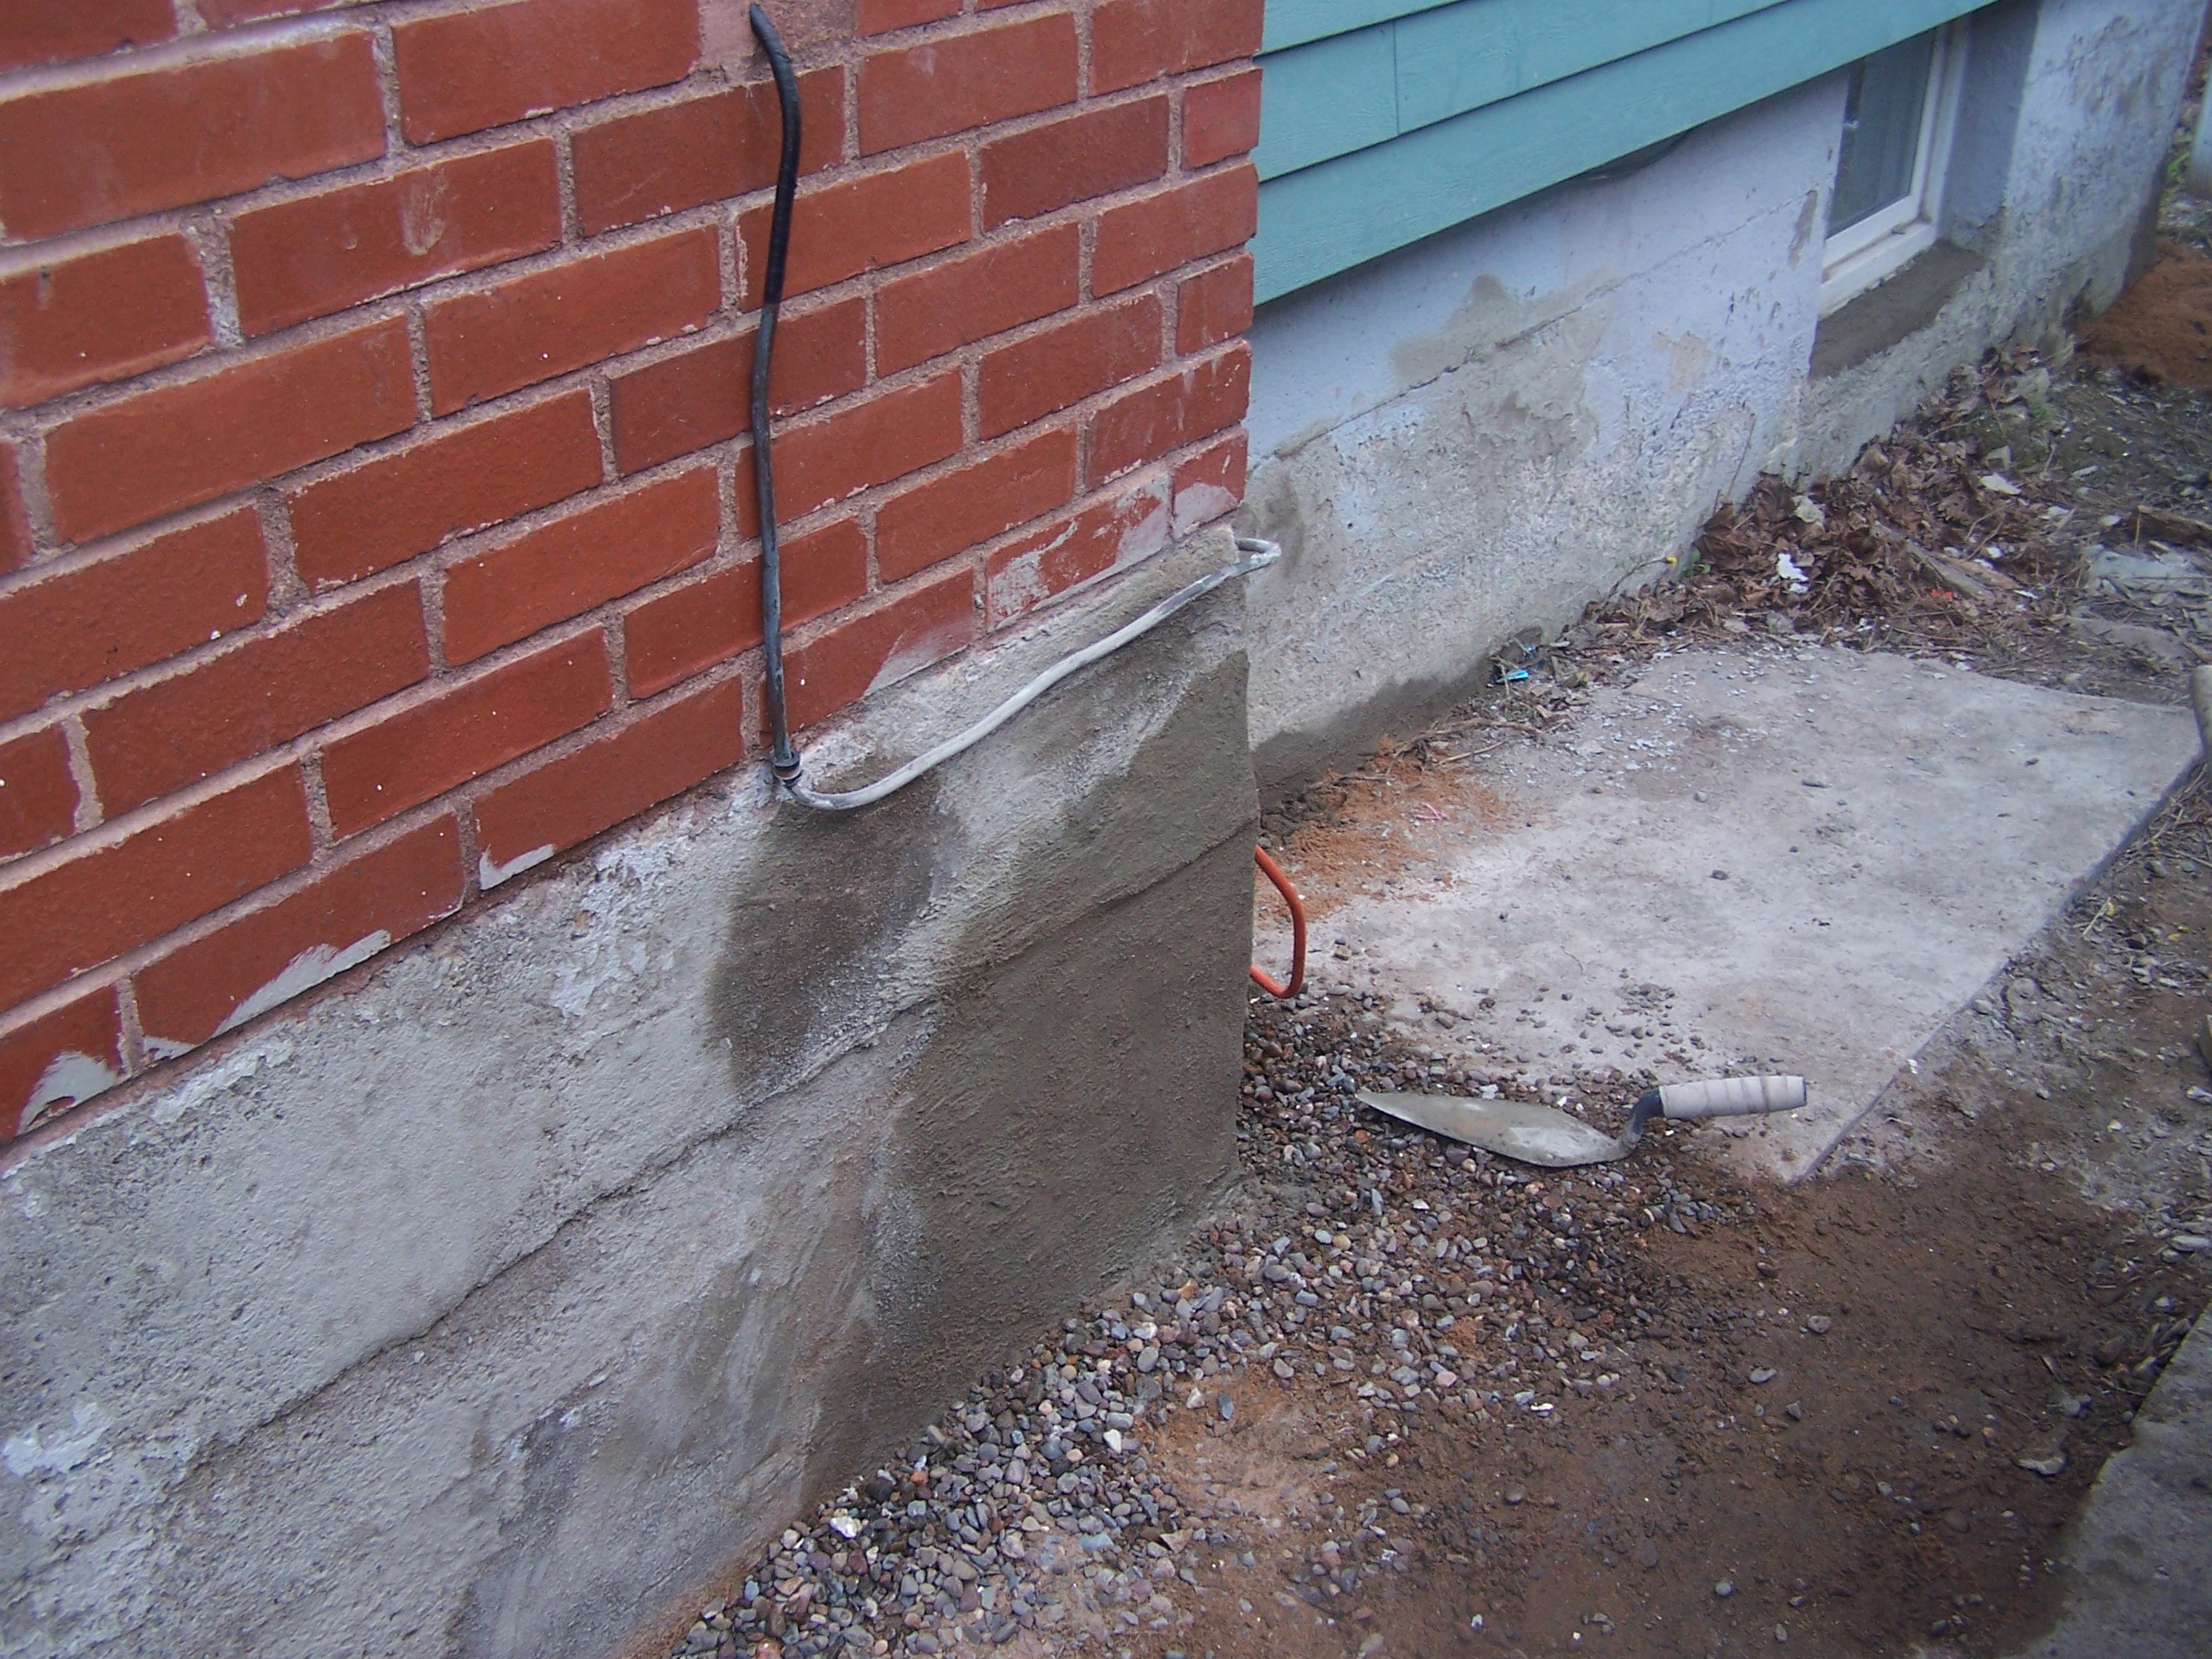 image of concrete foundation-concrete foundation repairs completed in South End Halifax, NS by Pro Chimney Services based in Halifax, NS is providing their concrete foundation repair services to all of the Halifax-Dartmouth Regional Municipality, Bedford, Sackville, Mount Uniacke, Hantsport, Windsor, Wolfville, Kentville, Chester Basin, Mahone Bay, Lunenburg, Bridgewater, Liverpool, Fall River, Wellington, Enfield, Elmsdale, Brookfield, Truro, Musquodoboit Harbour & surrounding areas.